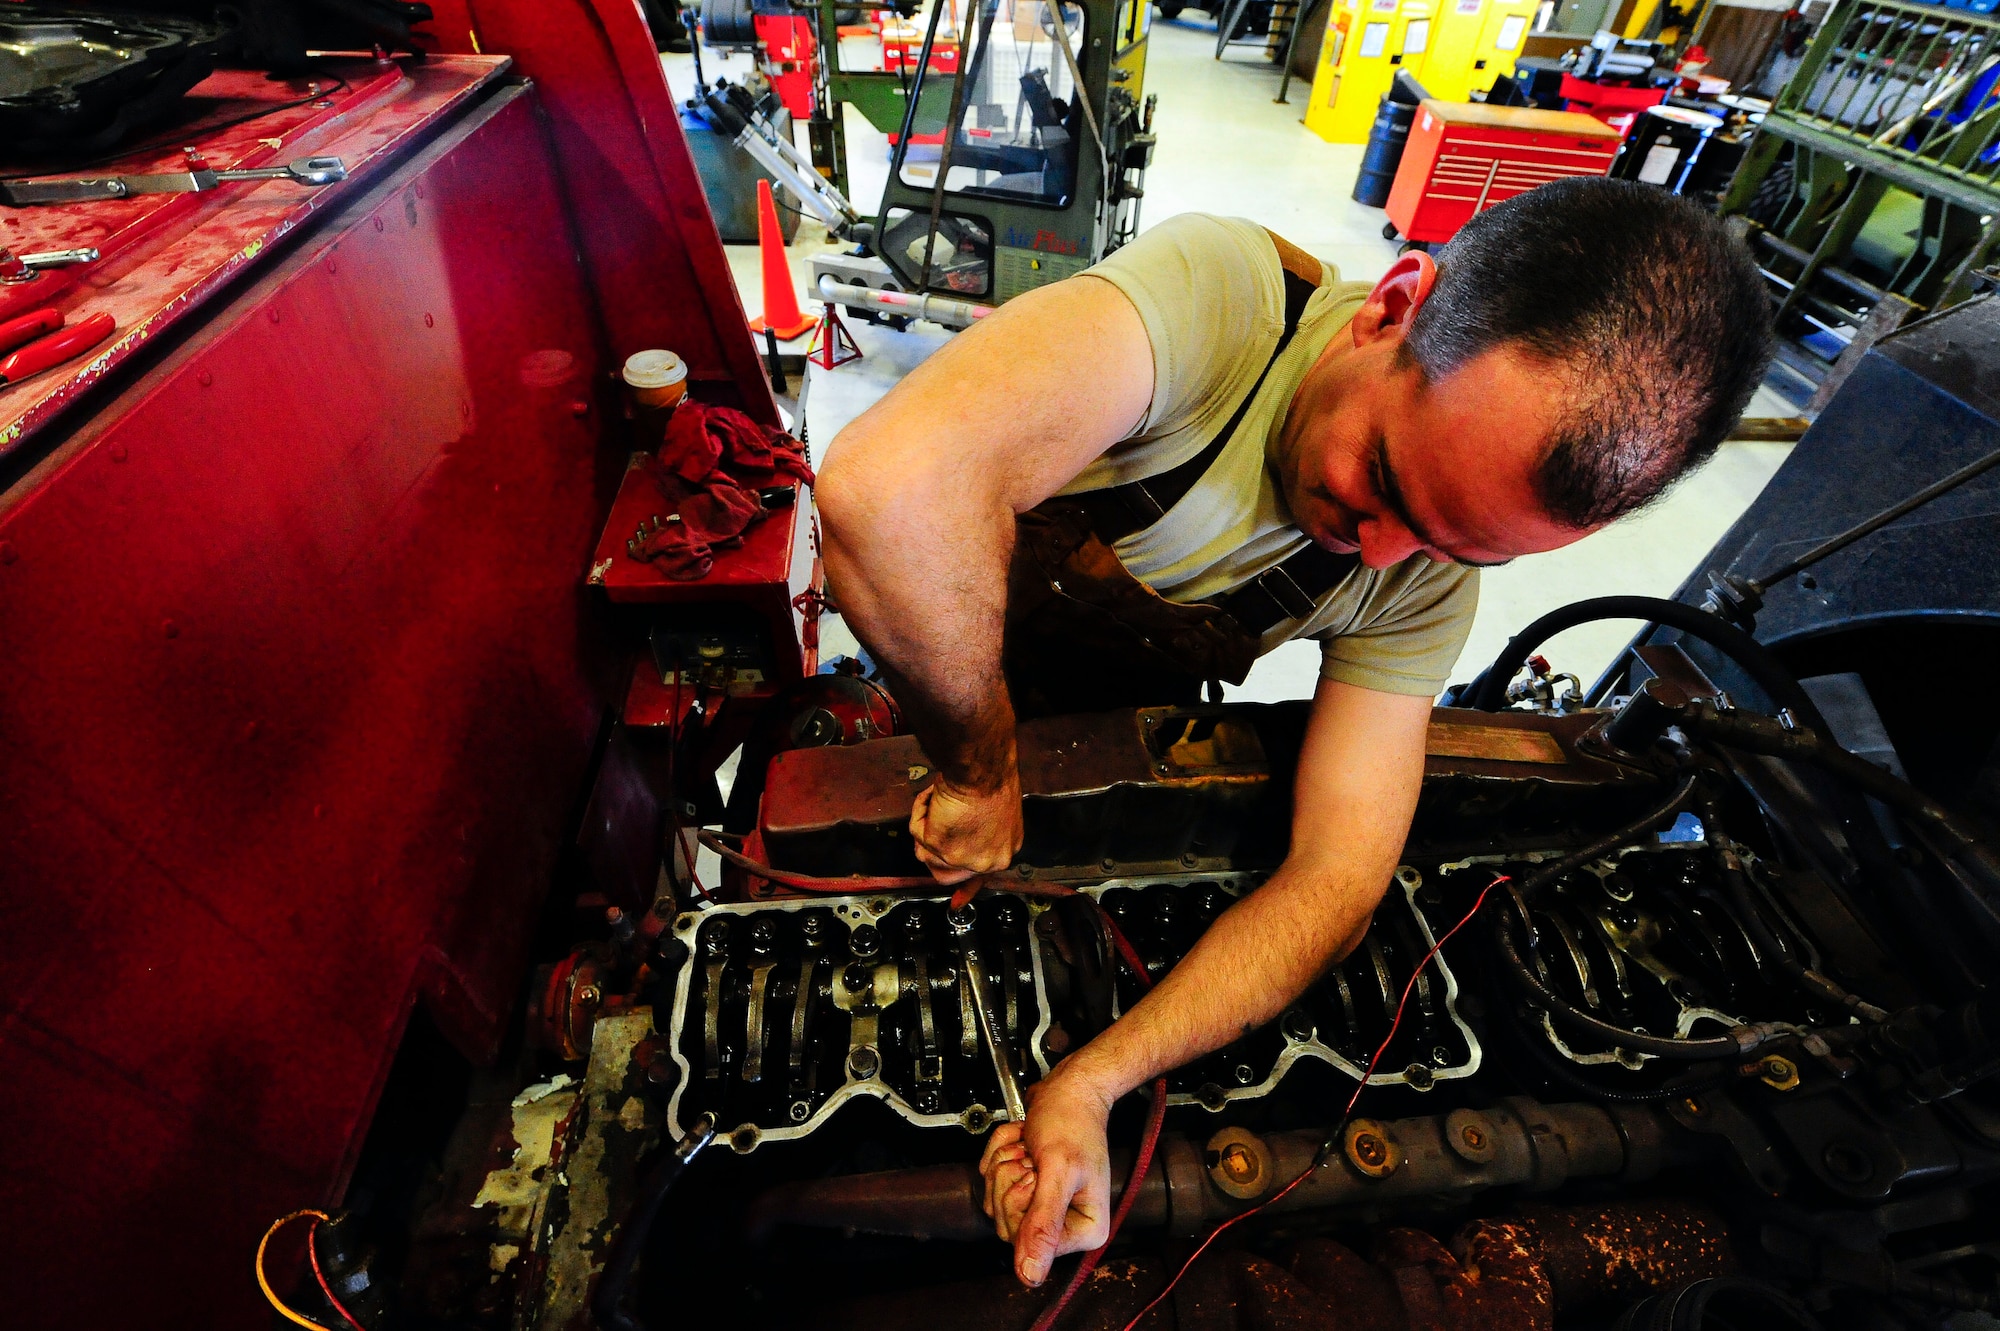 Staff Sgt. Nicholas Cawley, 1st Special Operation Logistics Readiness Squadron vehicle equipment journeyman, fixes the water pump on a fire truck at Hurlburt Filed, Fla., Jan. 21, 2015. Vehicles are brought to 1 SOLRS for maintenance and repair. (U.S. Air Force photo/Airman 1st Class Andrea Posey)